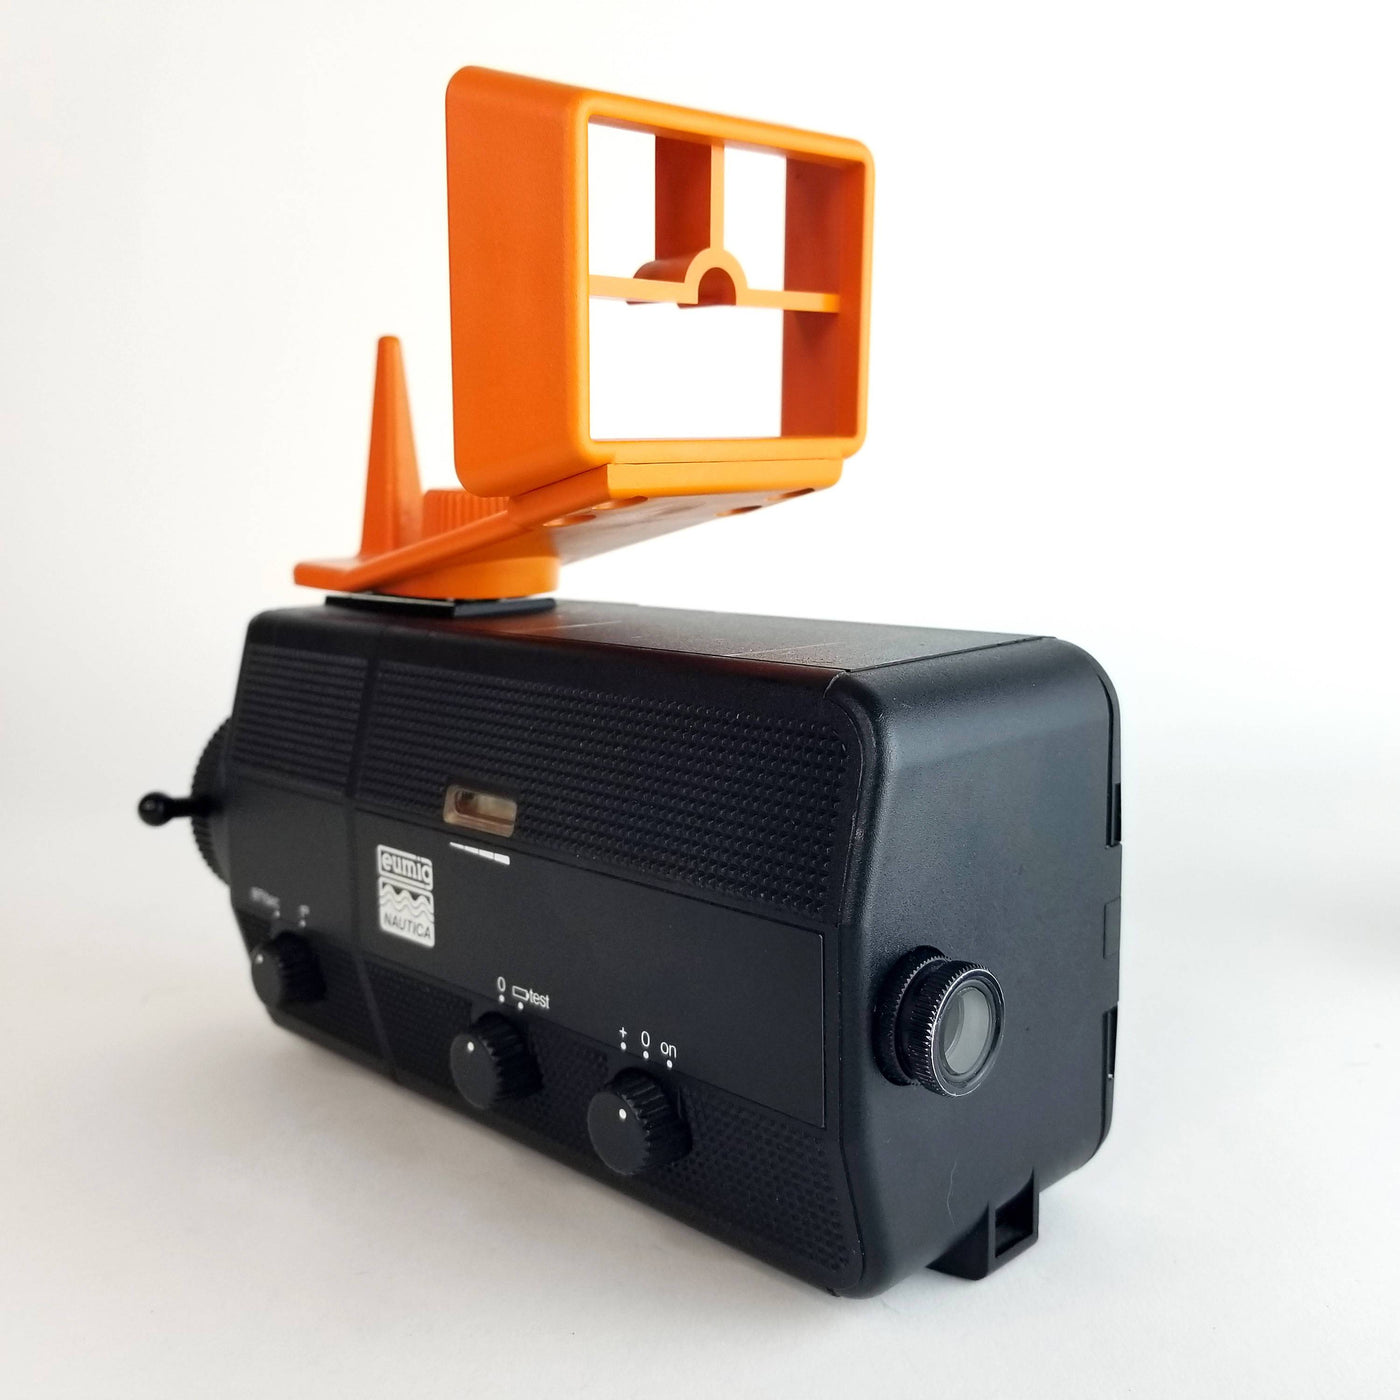 Eumig Nautica Underwater Super 8 Camera Professionally Serviced and Fully Tested Super 8 Cameras Eumig 